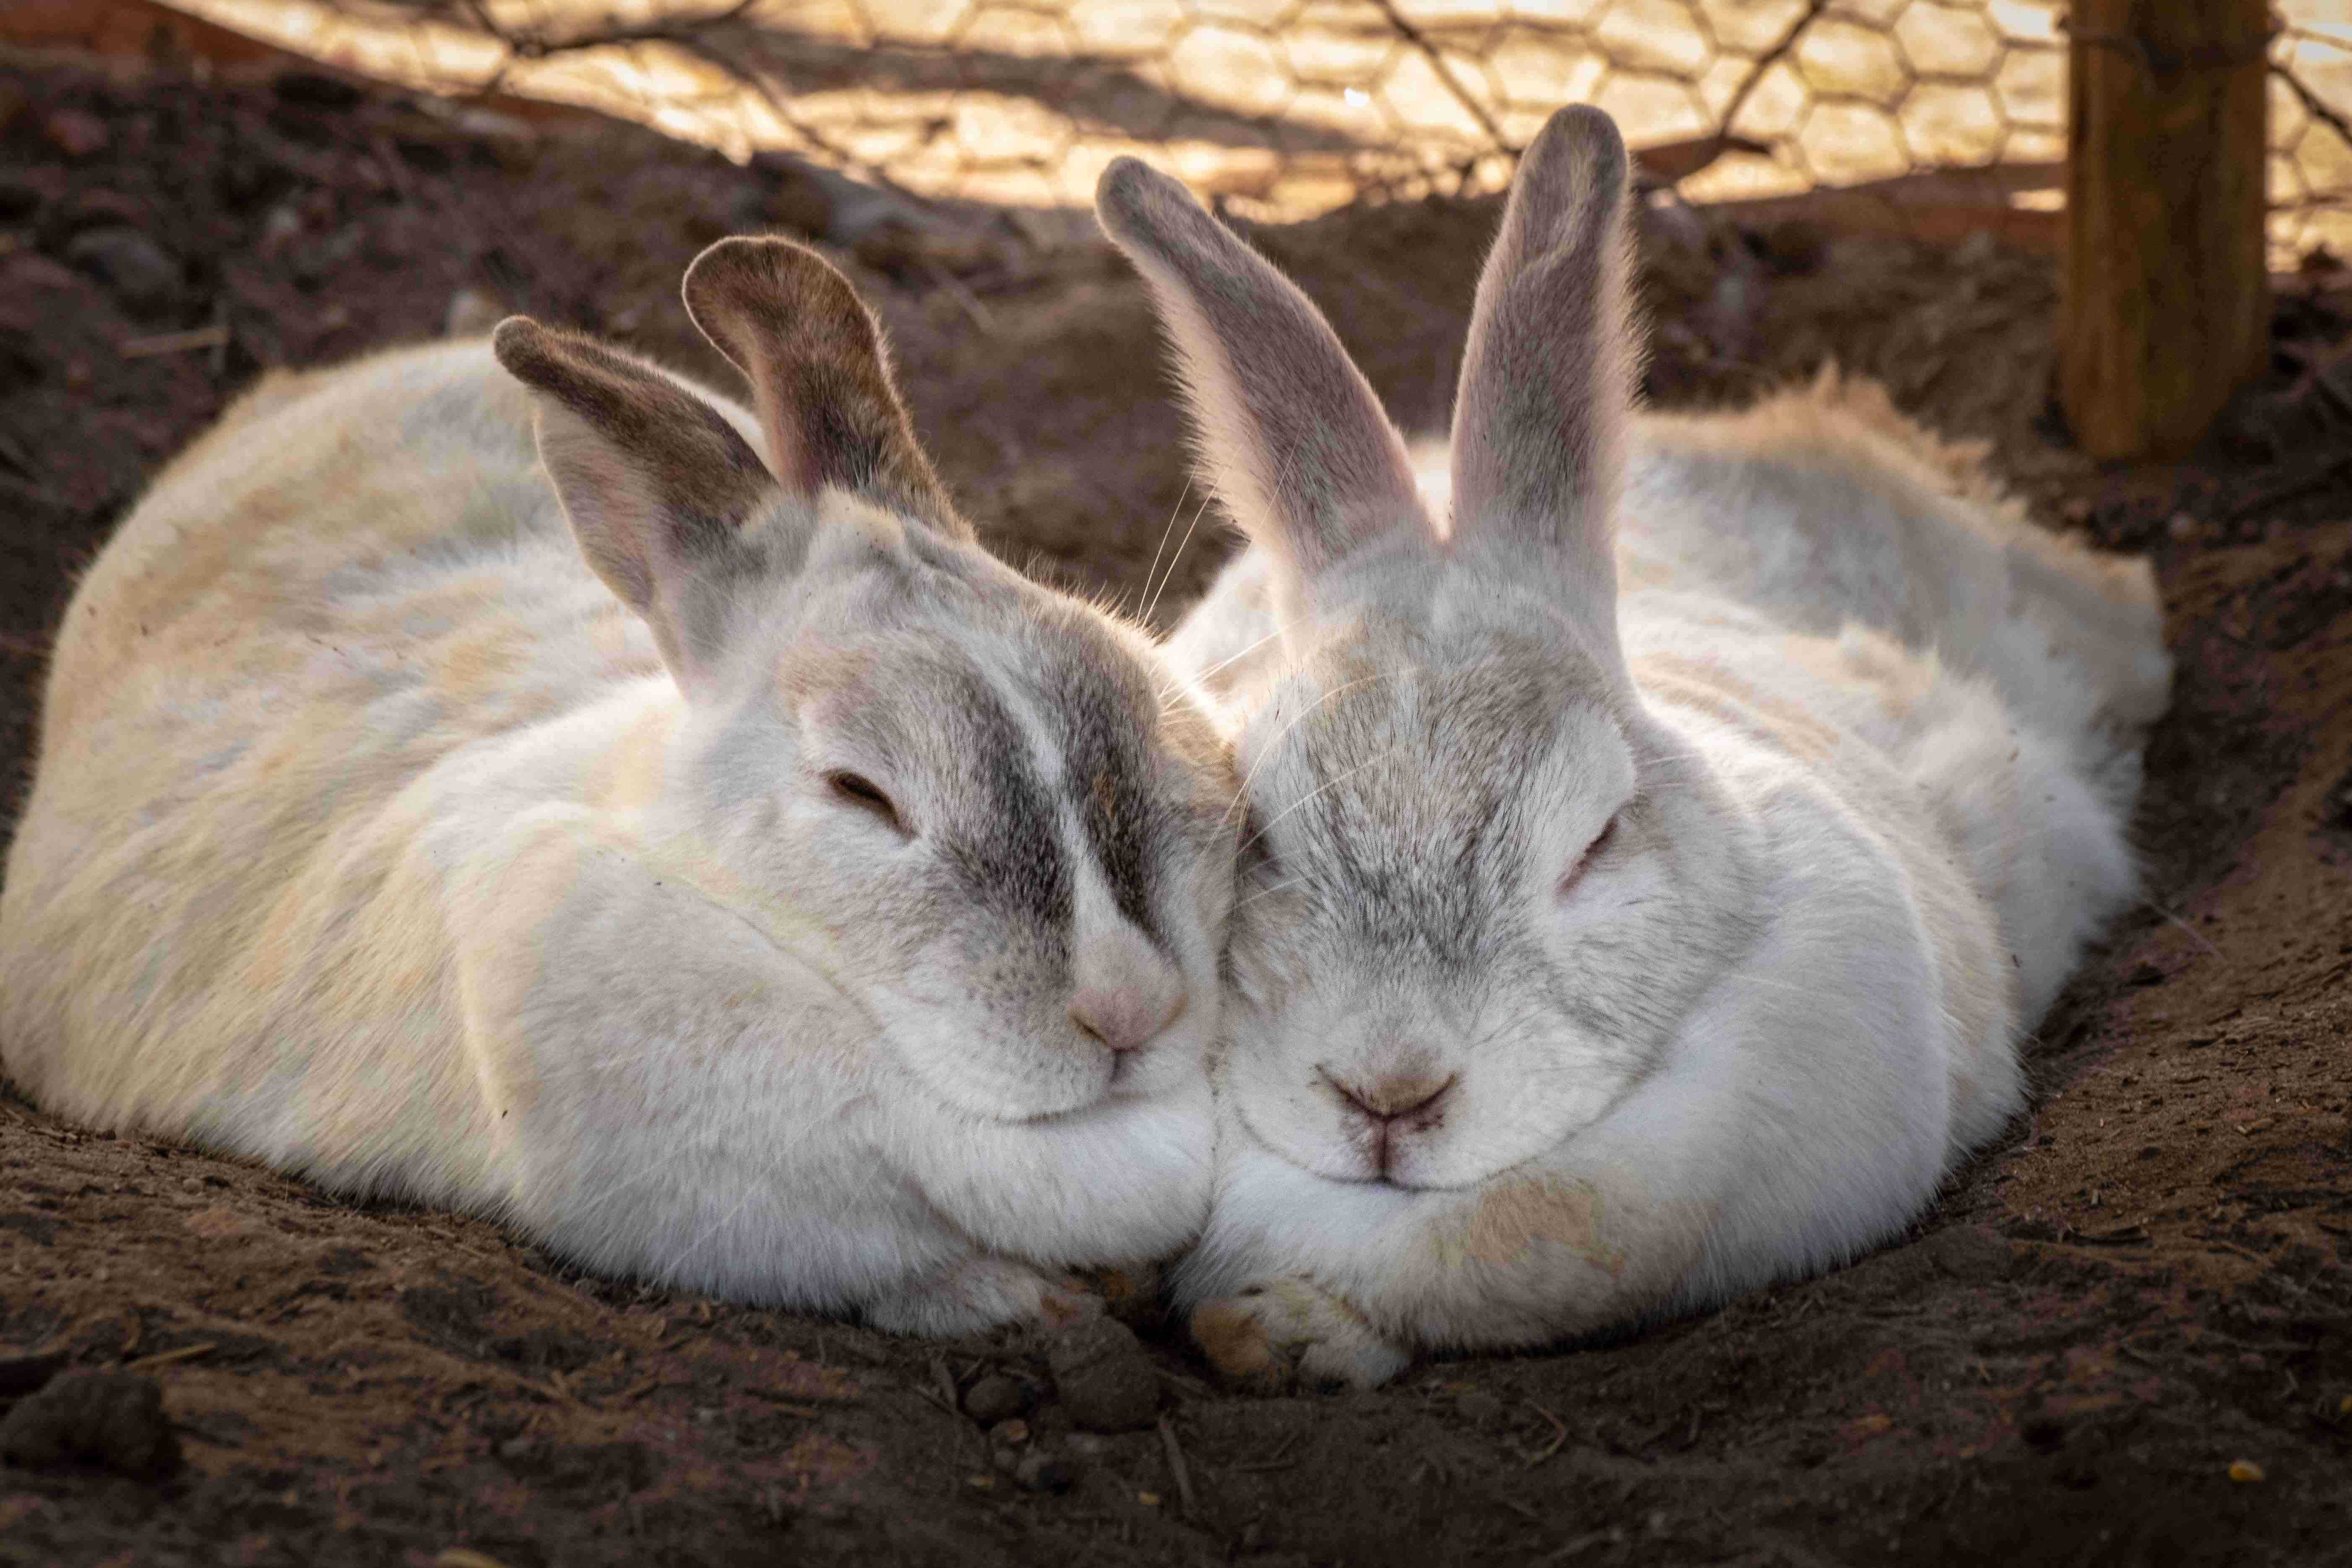 10 Household Items That Can Harm Your Rabbit: A Guide to Keeping Your Bunny Safe